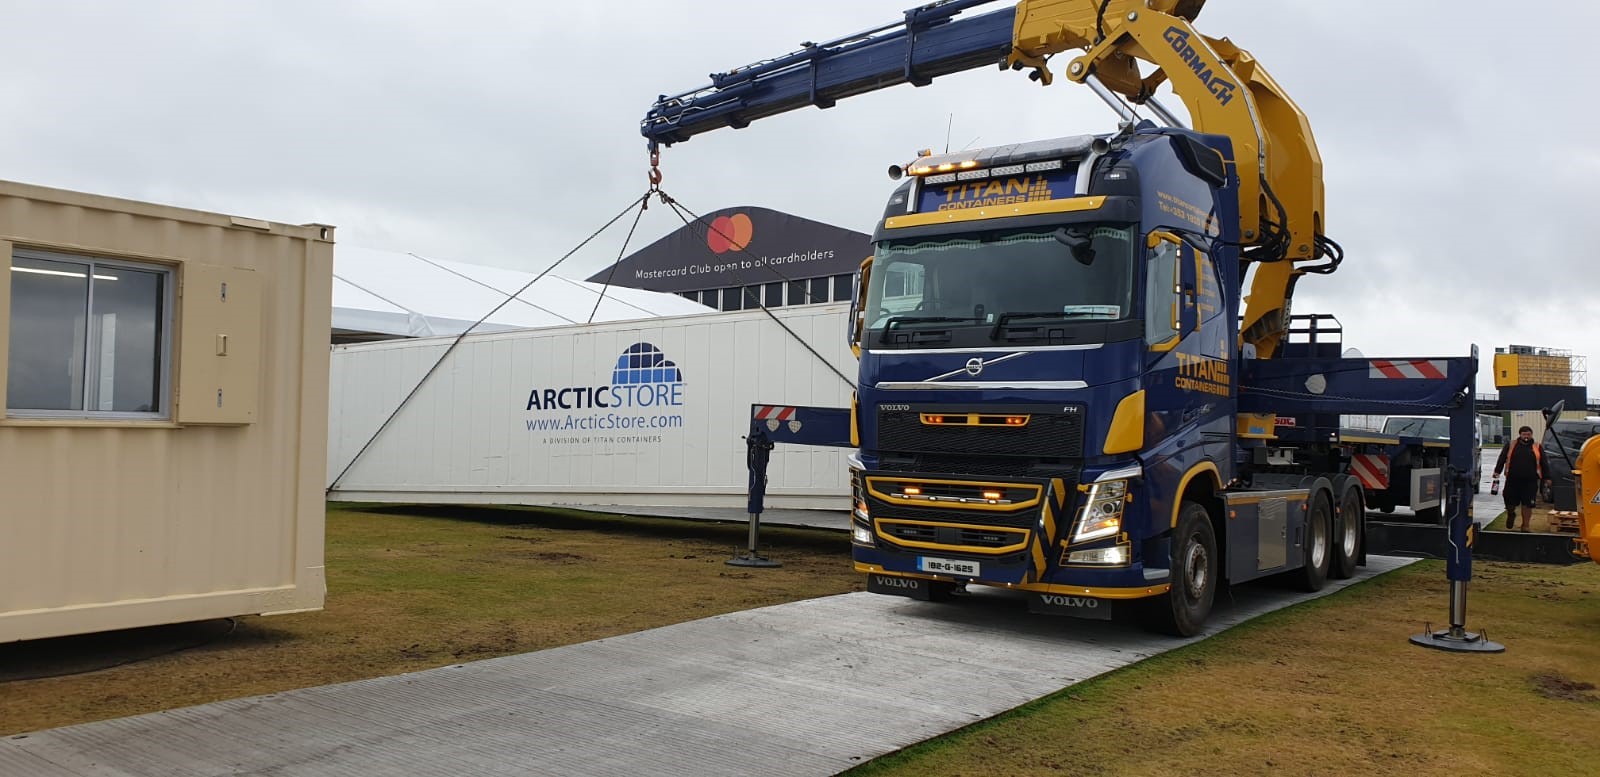 TITAN SUPPLY THE 148TH OPEN TO THE ROYAL PORTRUSH2